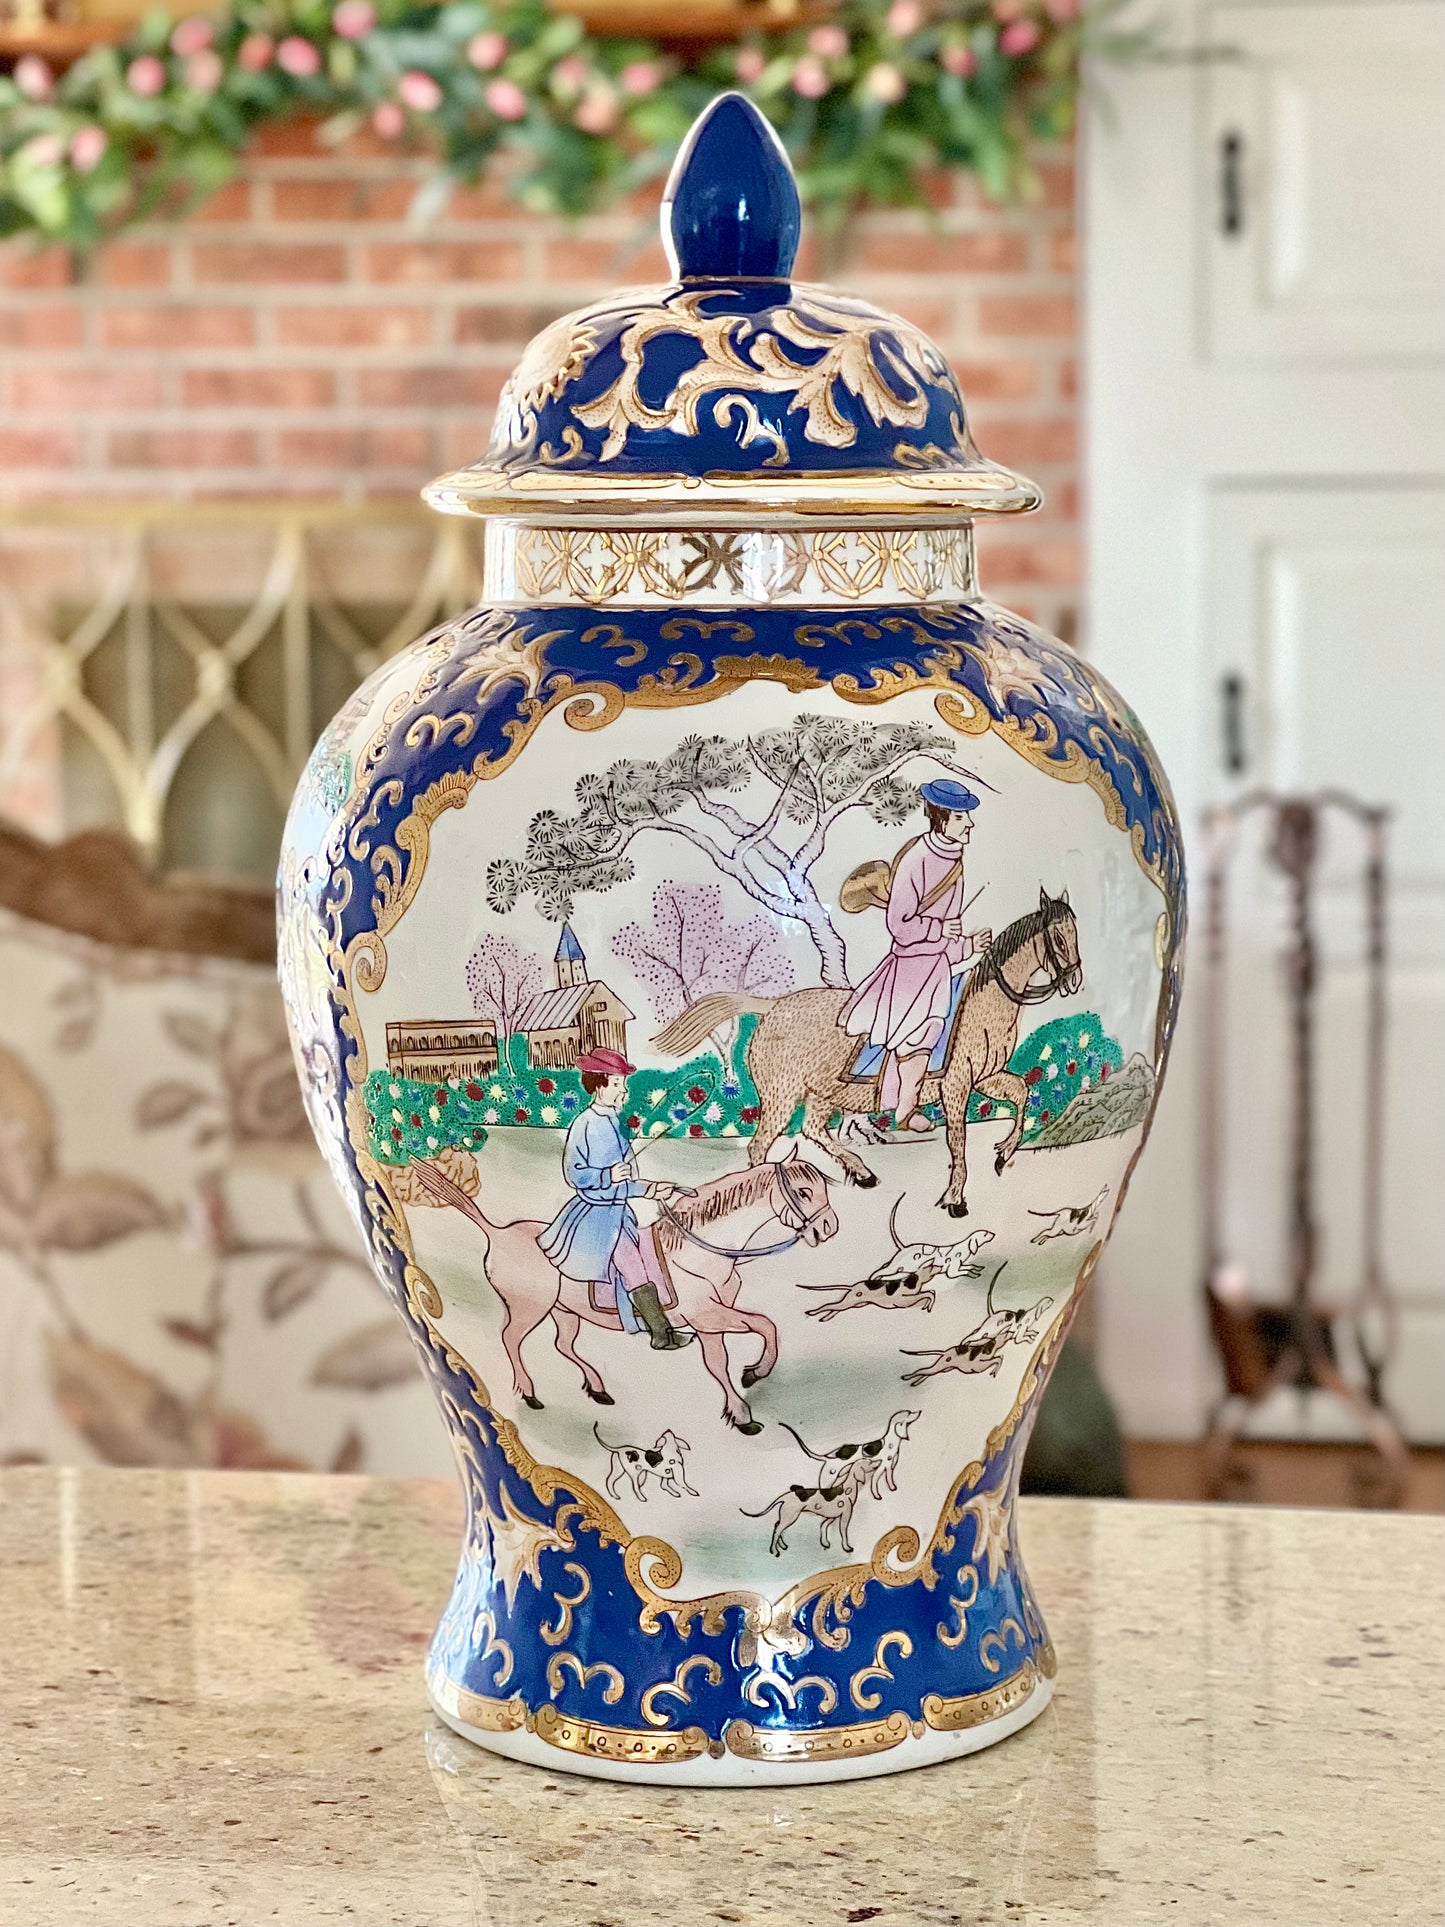 Vintage Chinese Porcelain Temple Jar with Hunt Scene, 14.5” tall - Excellent!